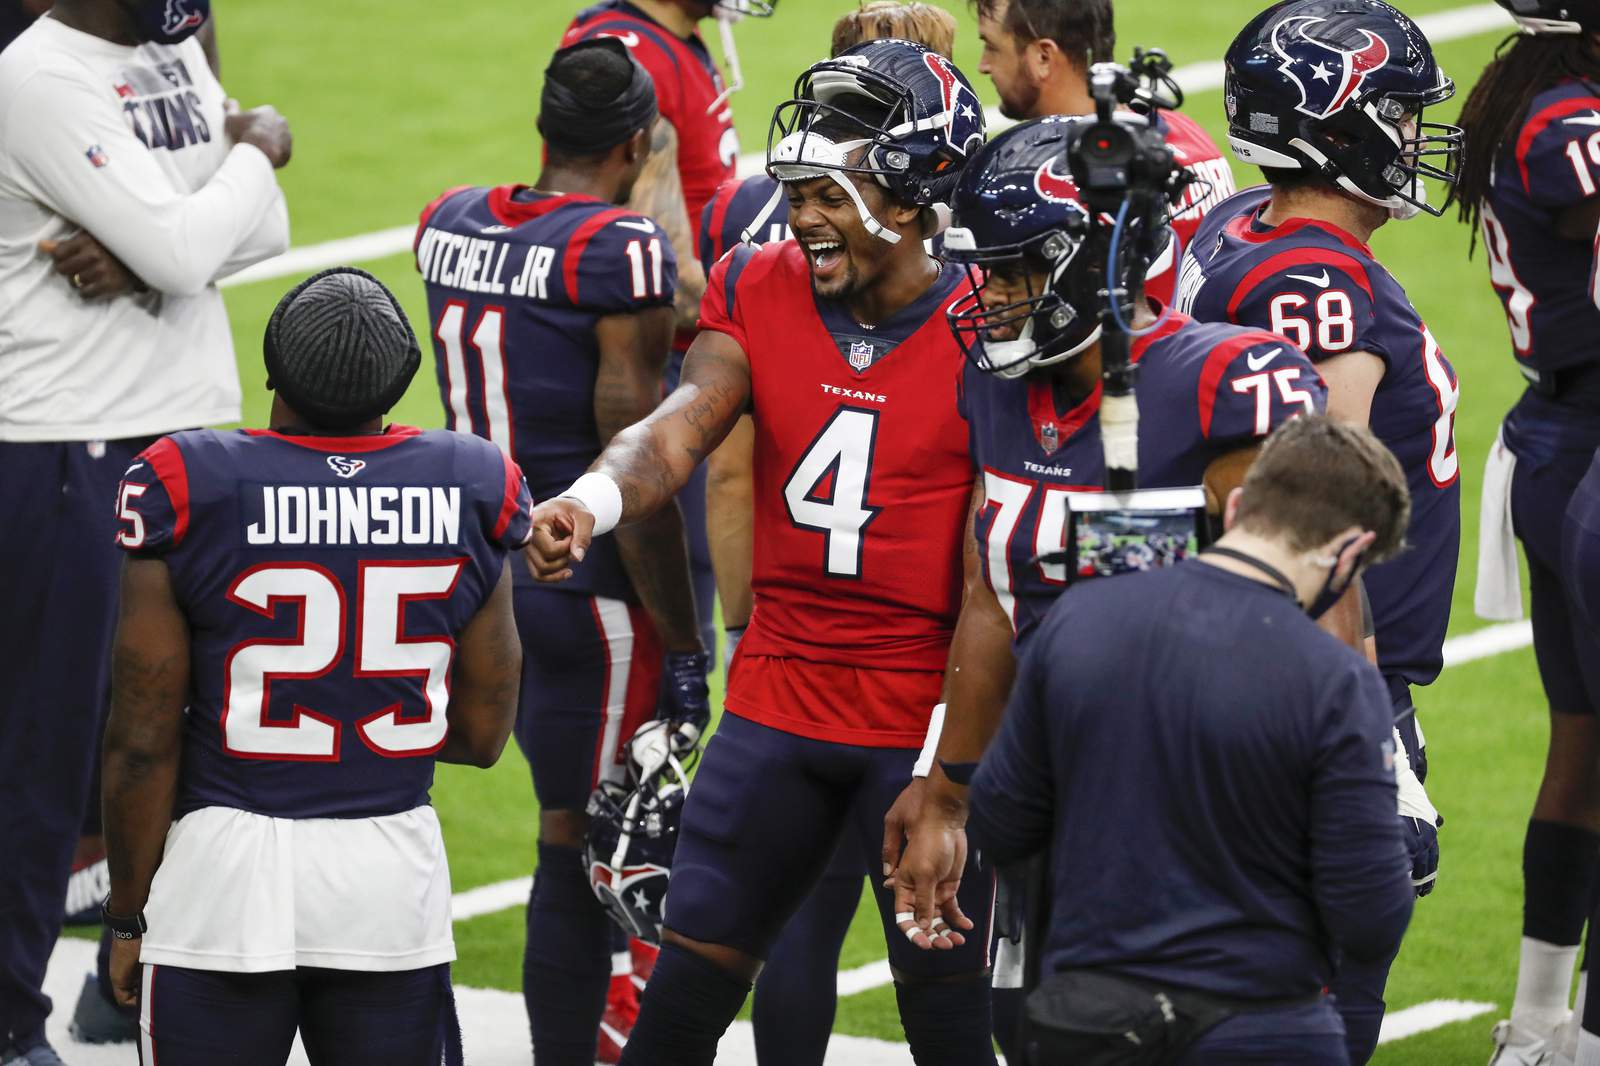 Watson agrees to 4-year, $160 million extension with Texans